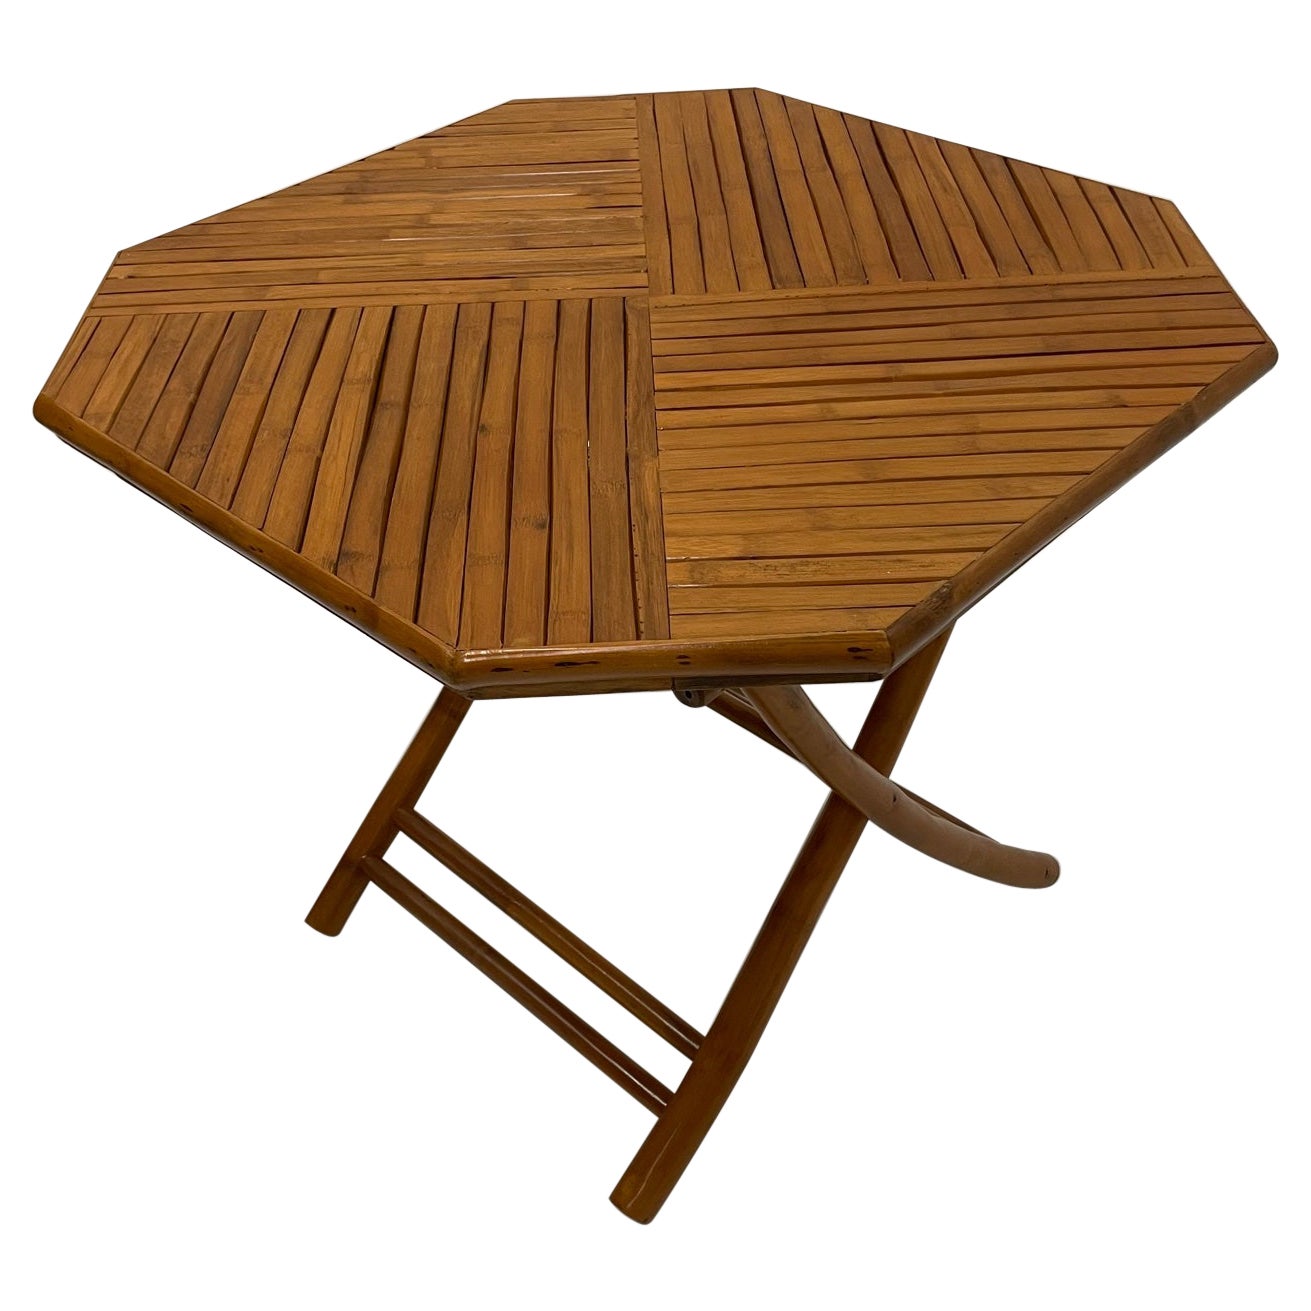 Stylish 8 Sided Folding Bamboo Breakfast or Center Table For Sale